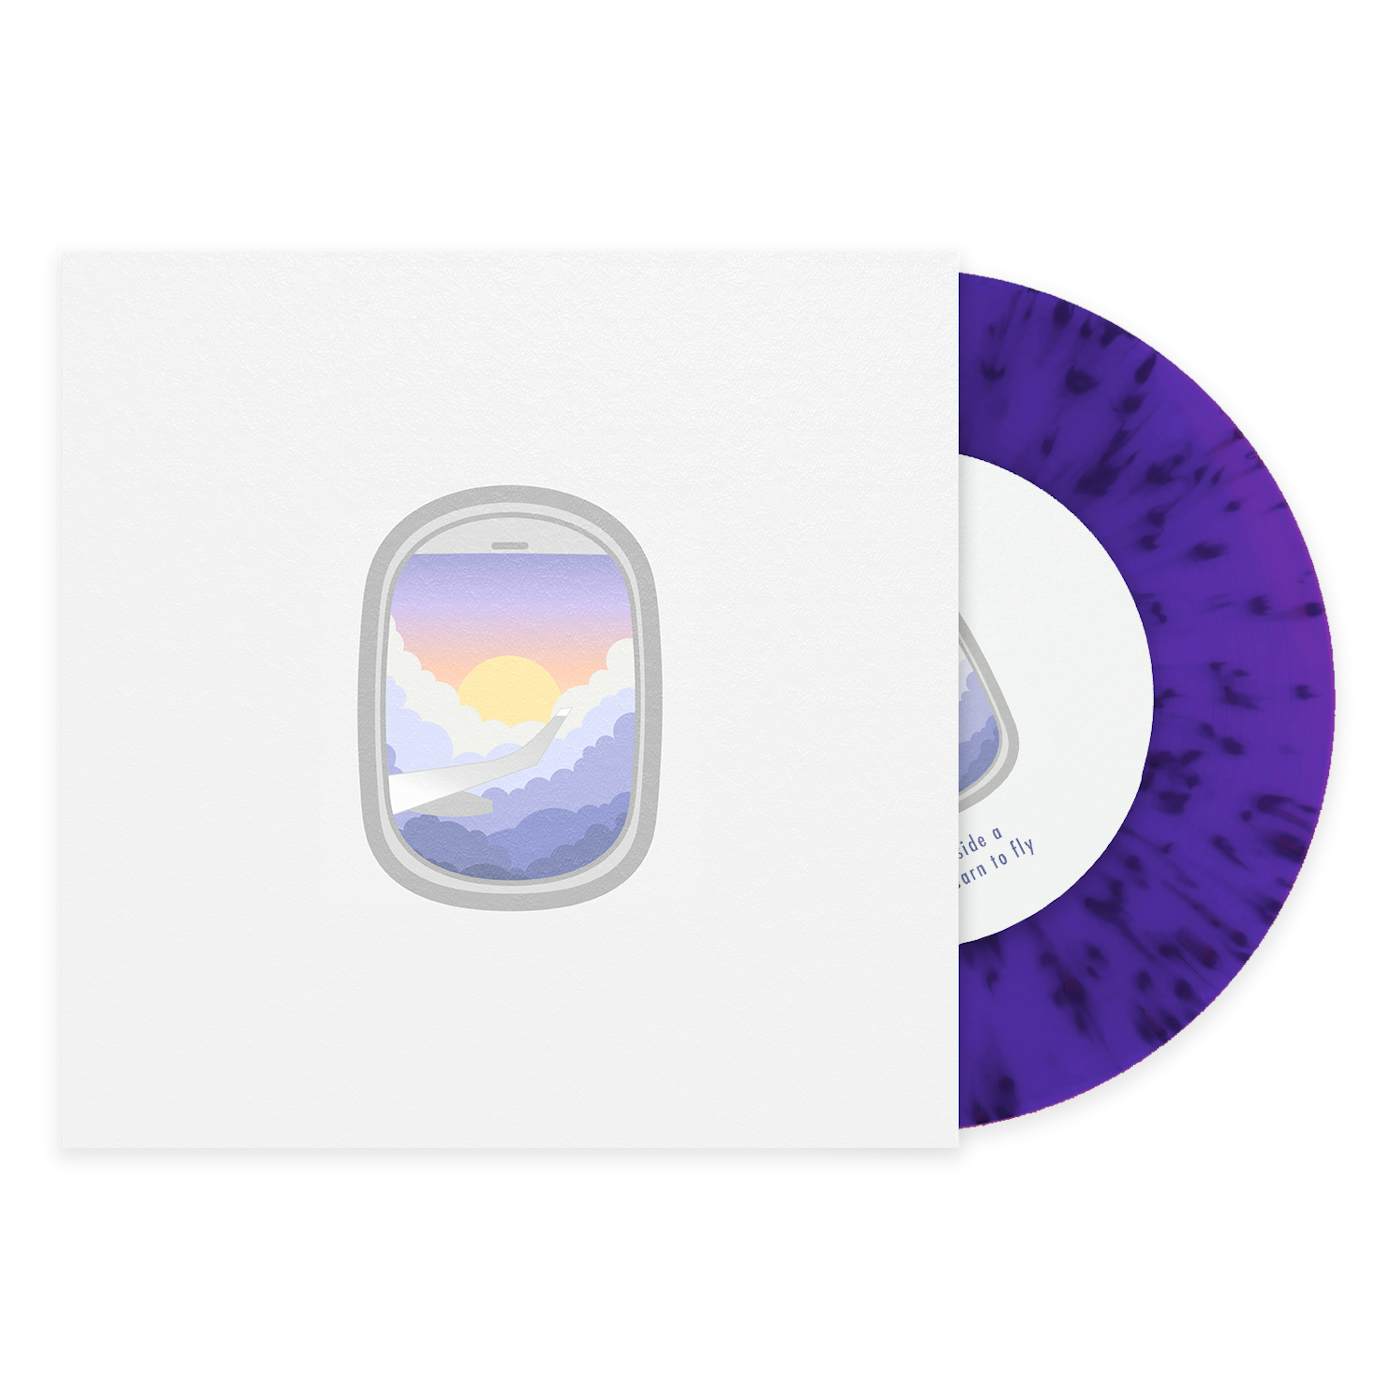 Surfaces Learn To Fly 7" Vinyl - Purple with Black Splatter